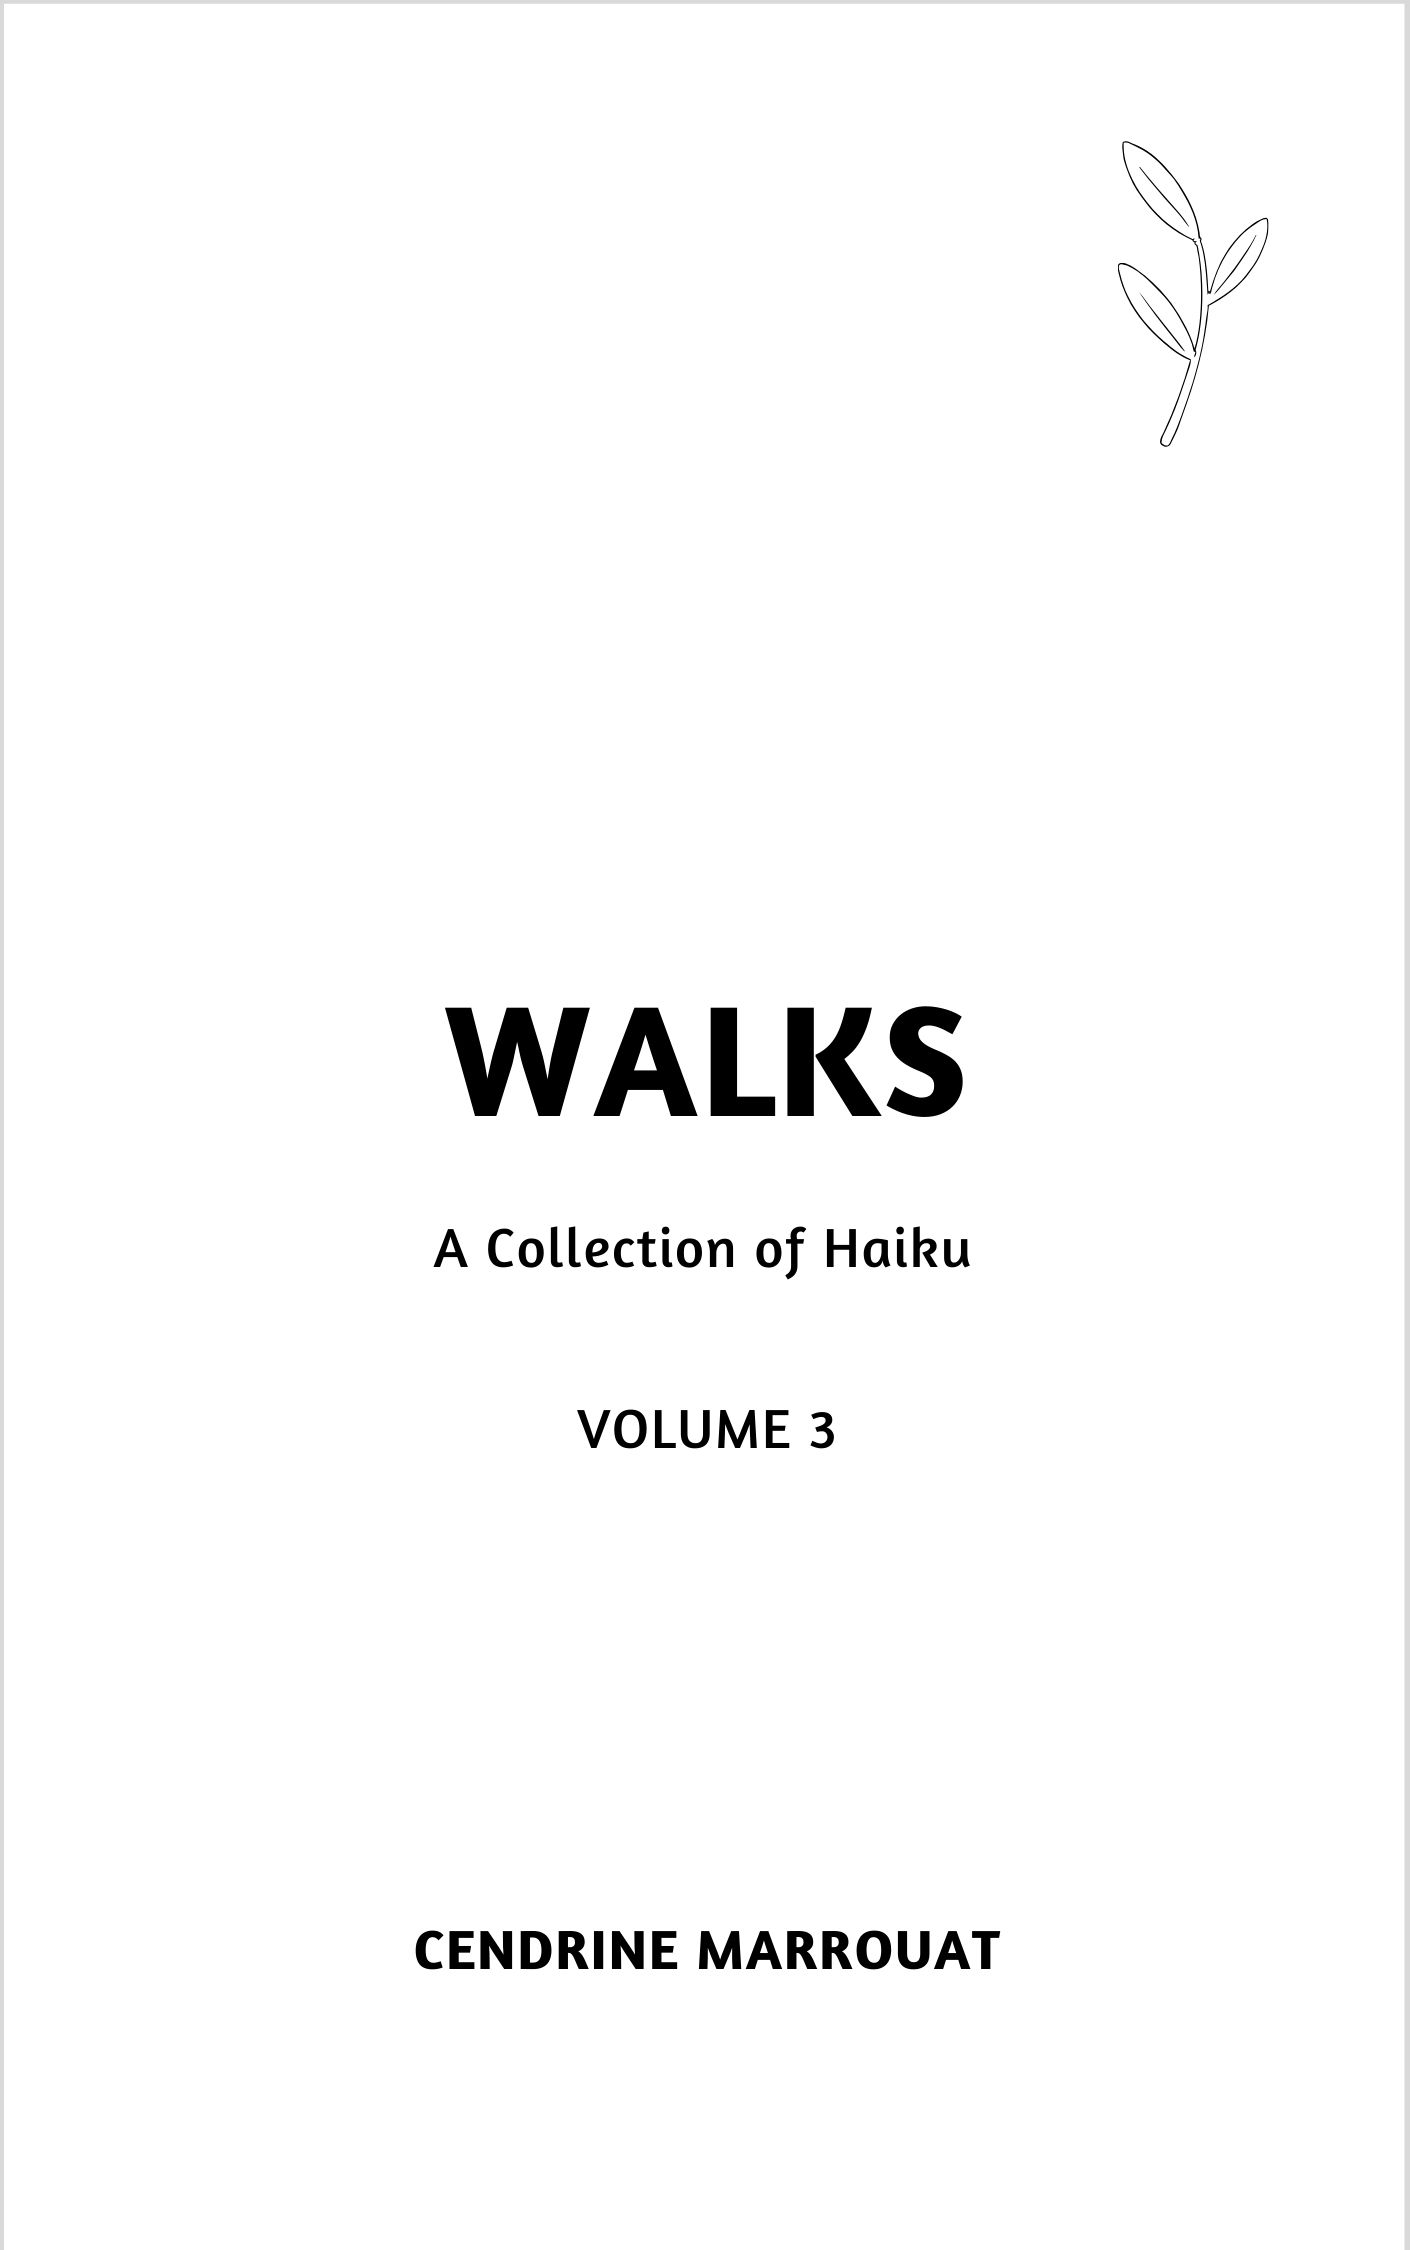 Walks: A Collection of Haiku (Volume 3) Cendrine Marrouat Book Cover